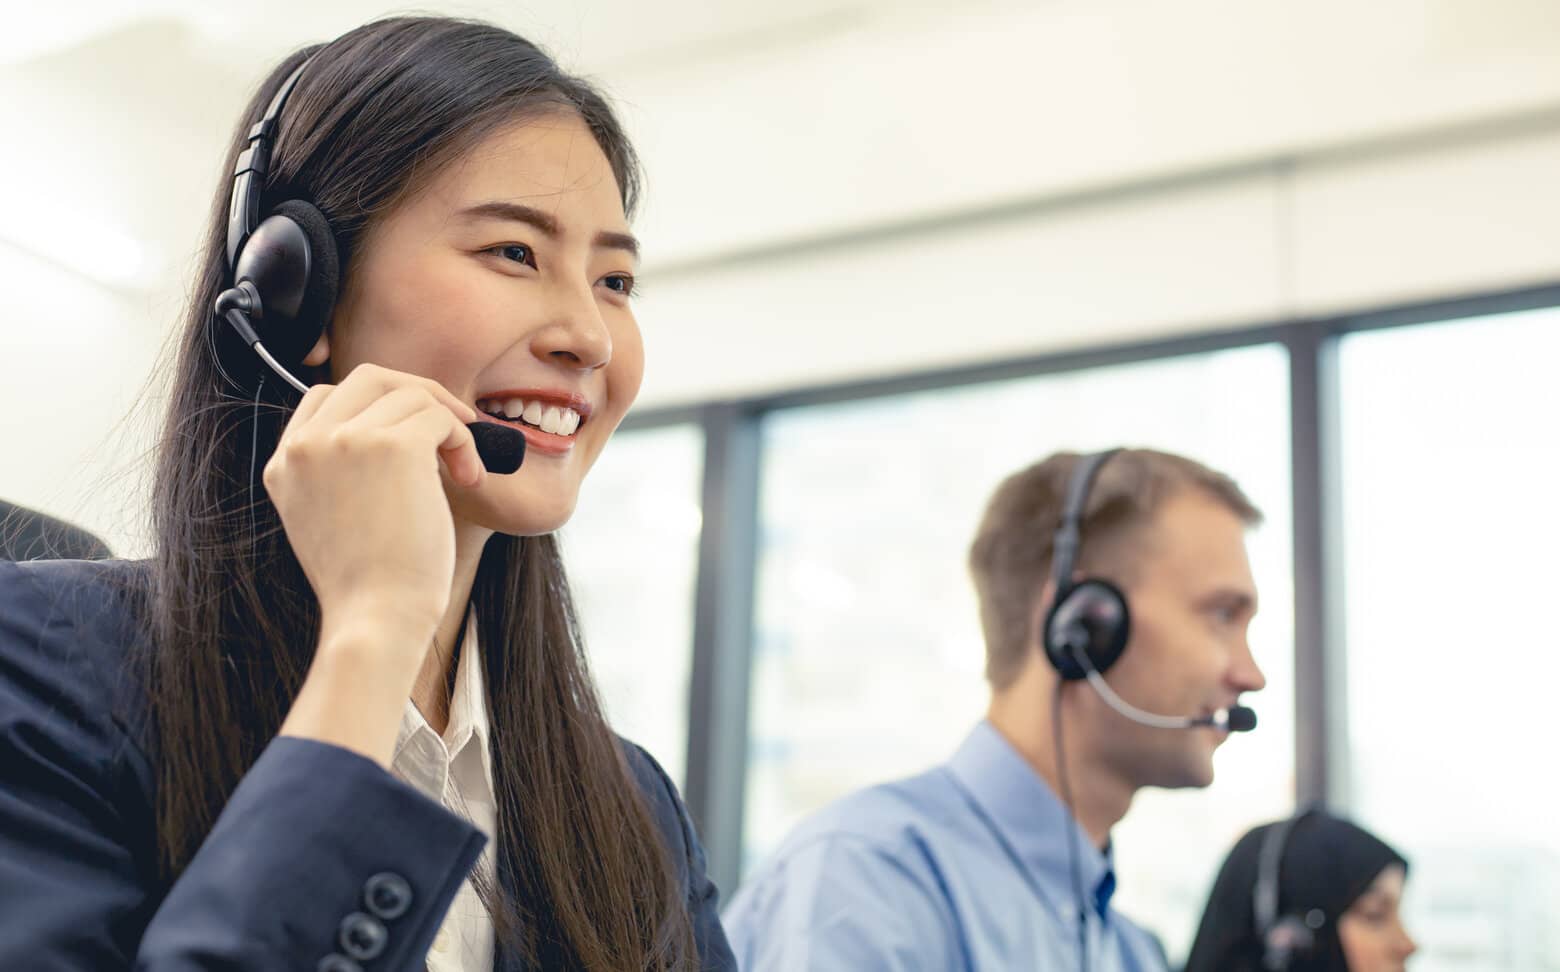 Does cold calling still work?